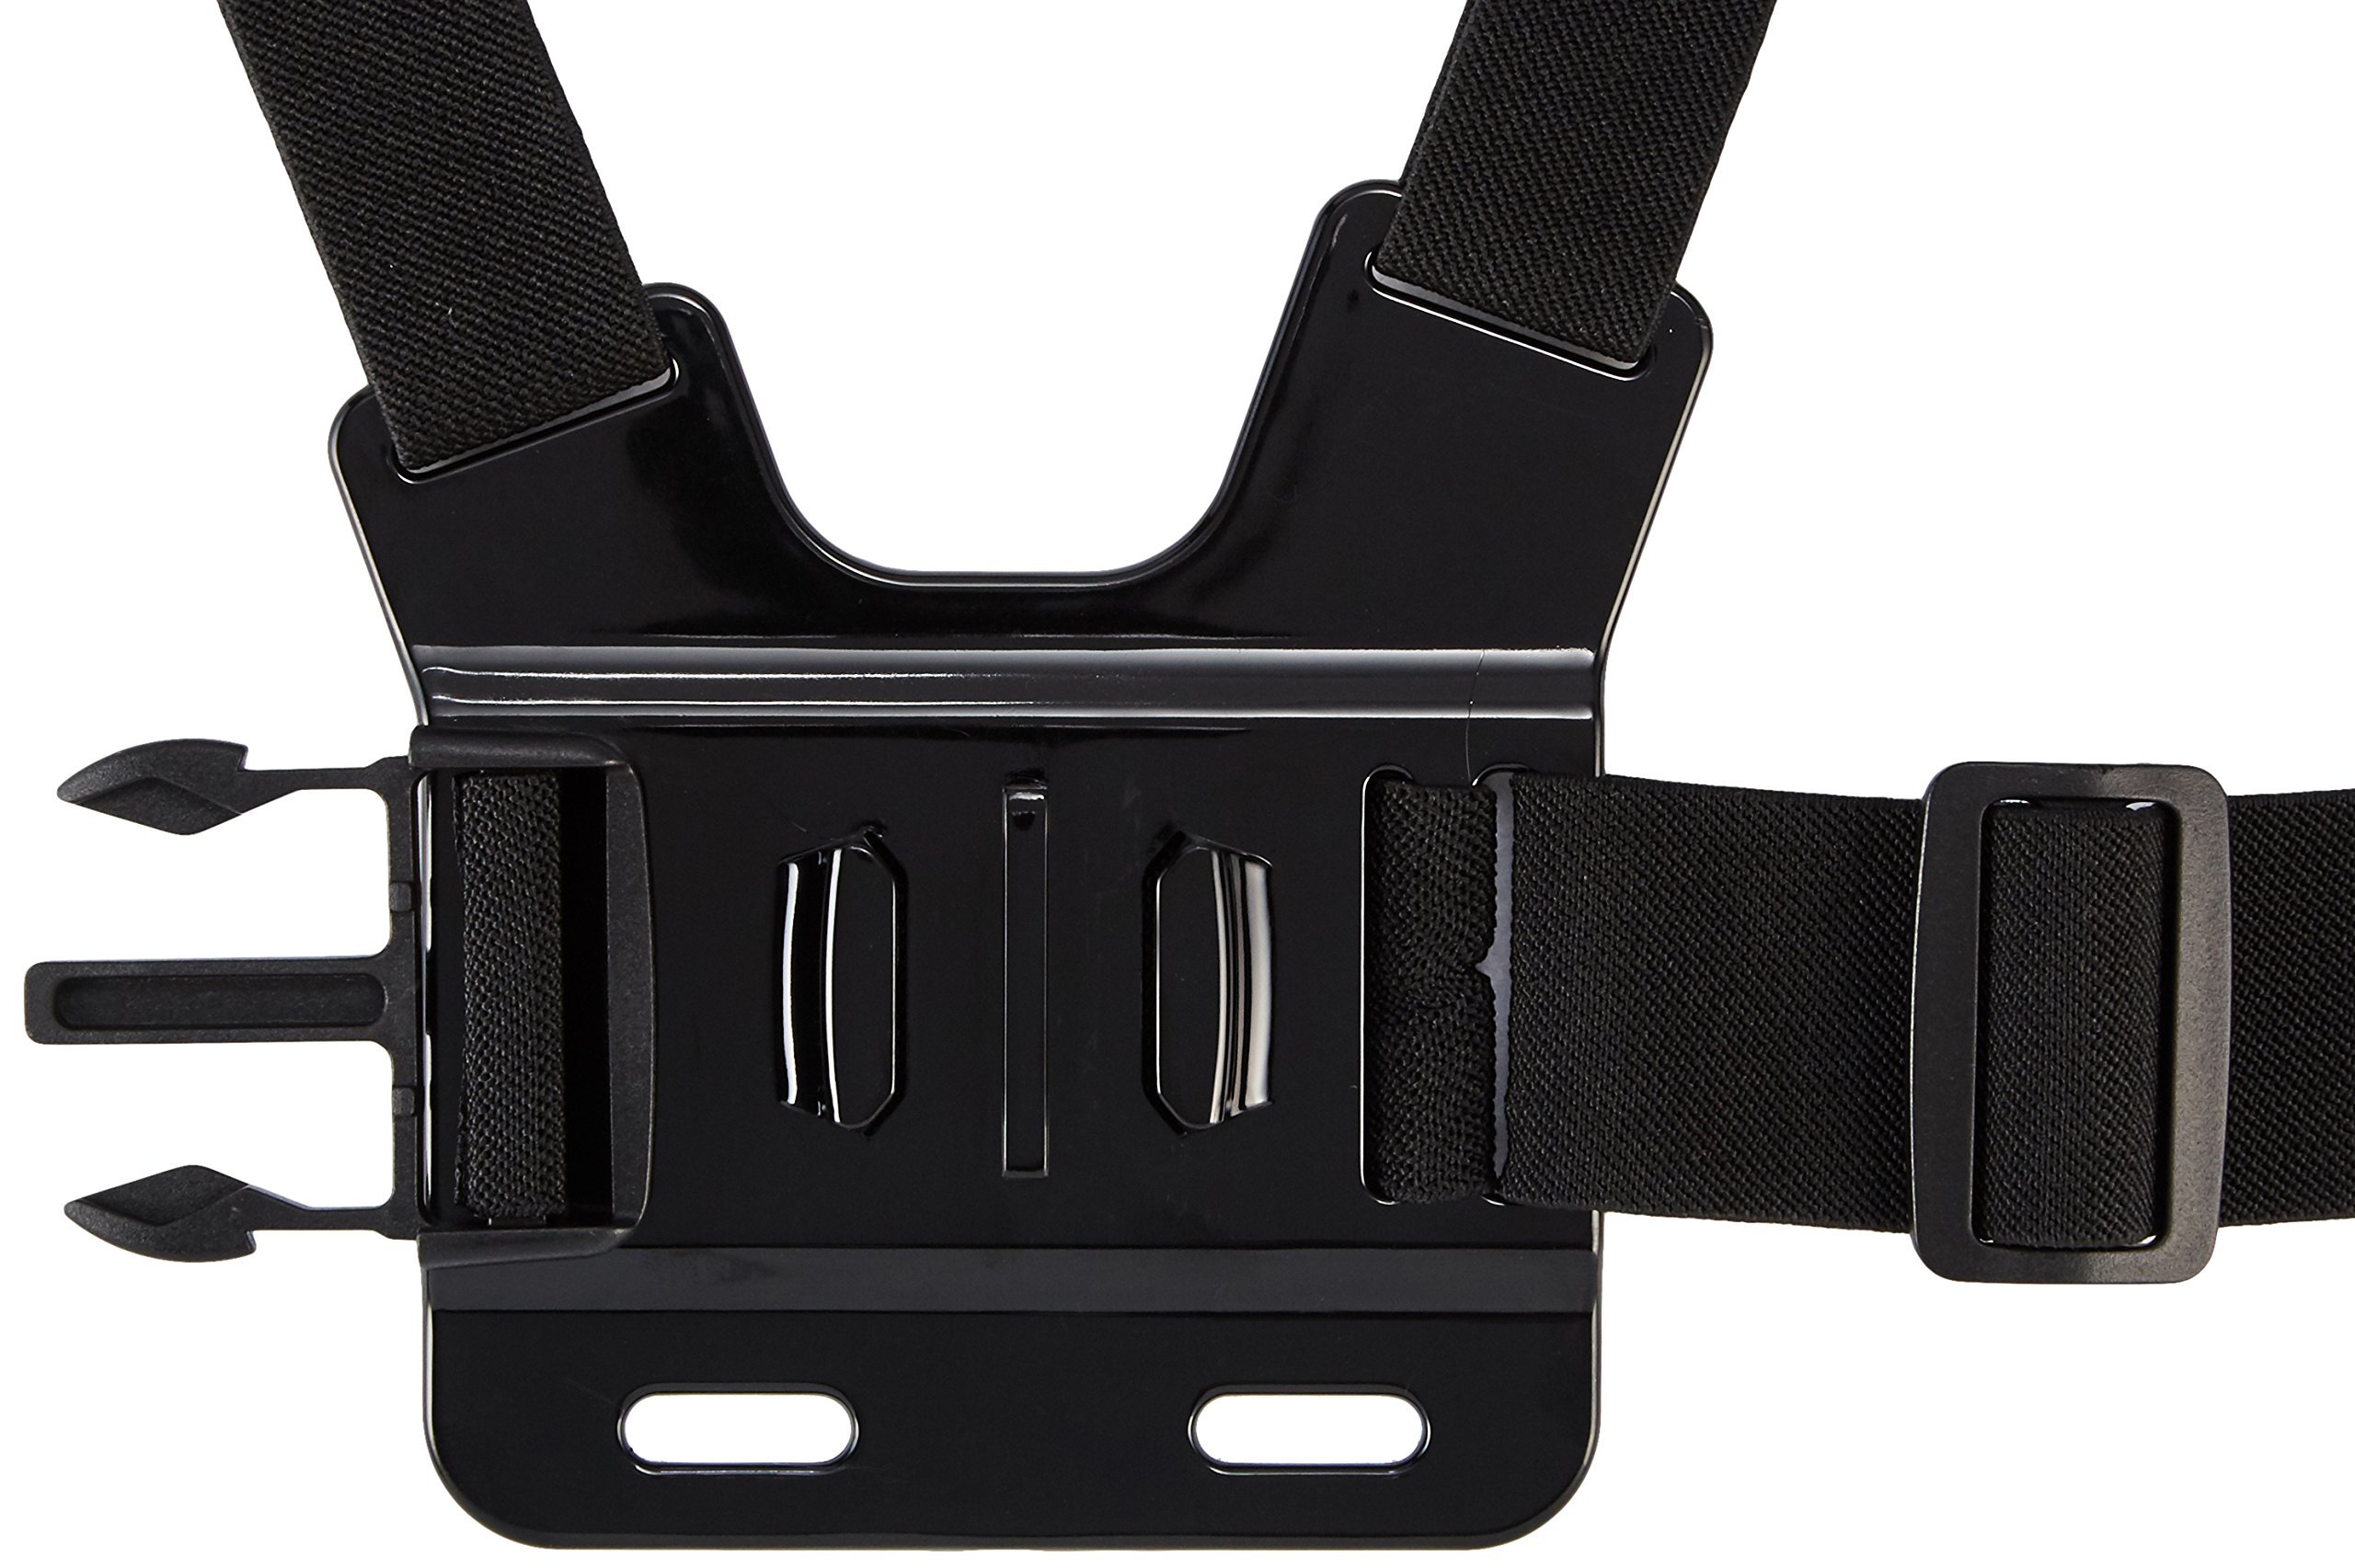 Amazon Basics Adjustable Chest Mount Harness For GoPro Camera (Compatible with GoPro Hero Series), Black